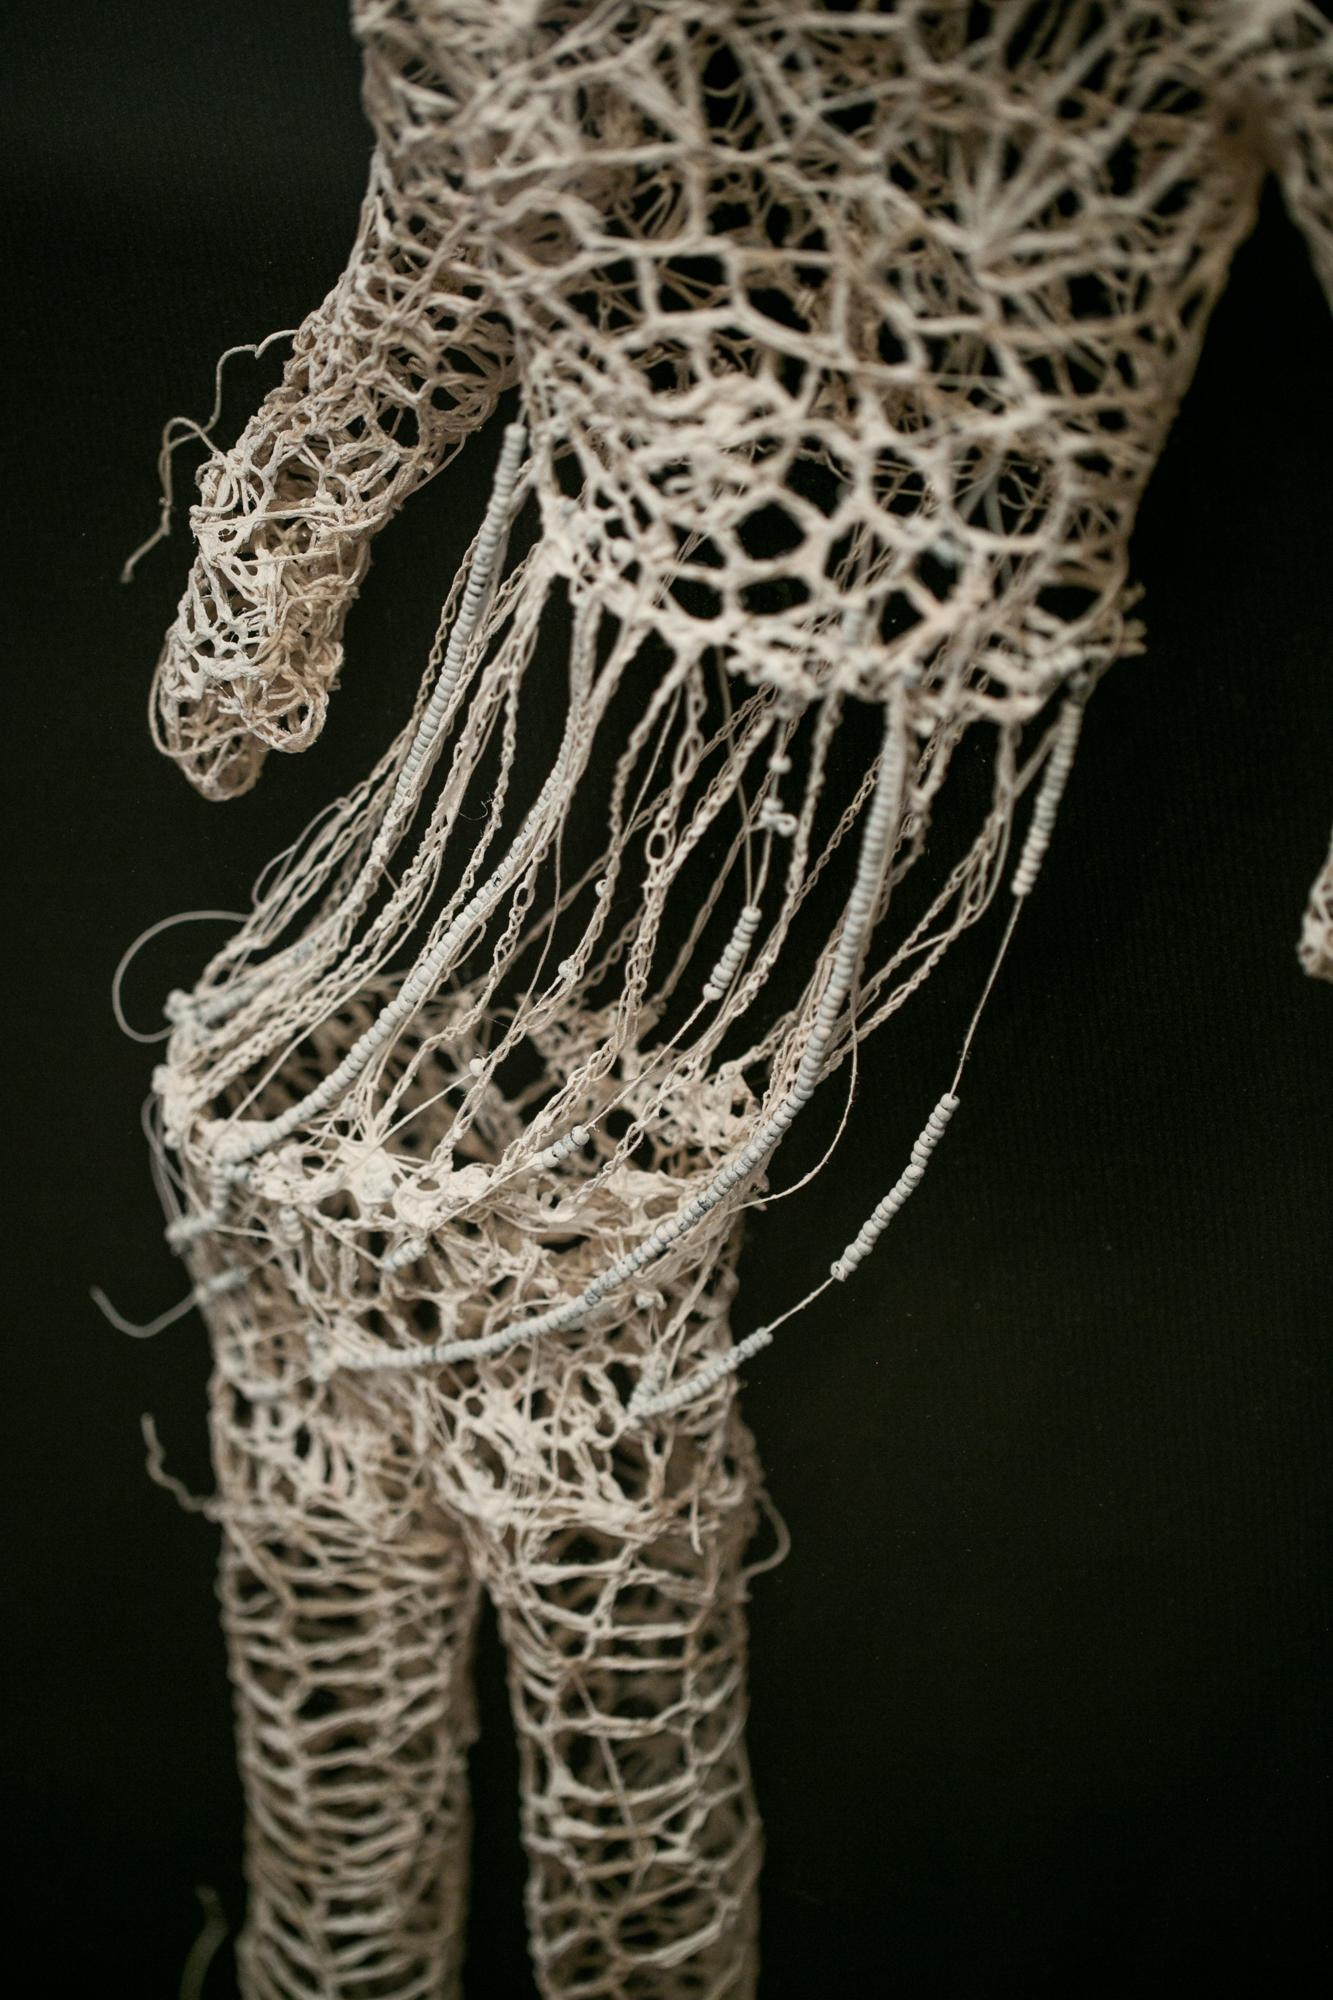 This crocheted, biomorphic sculpture titled 